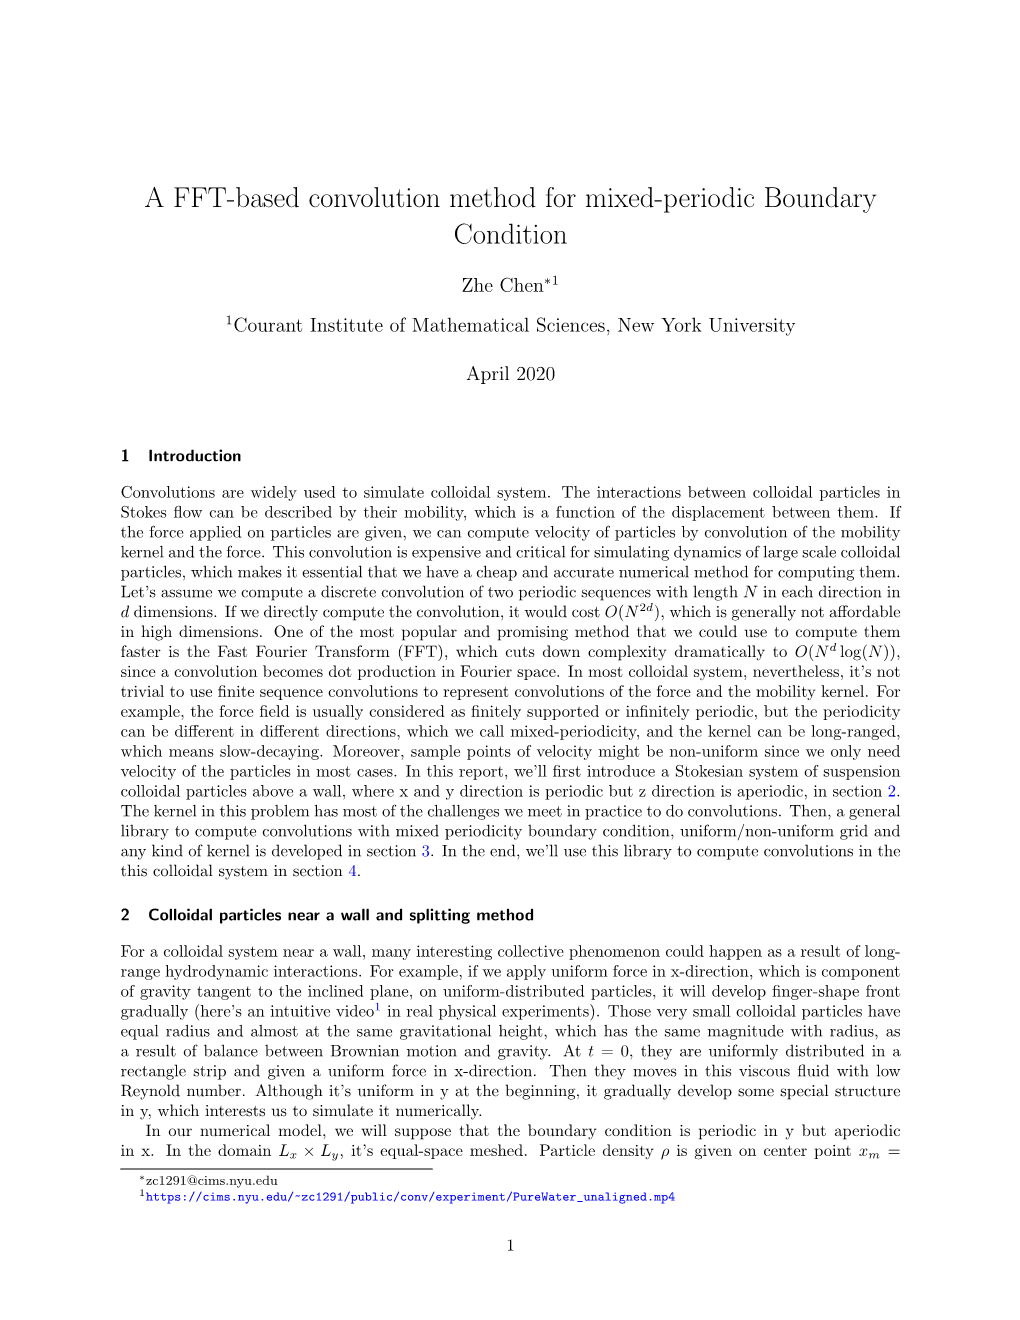 A FFT-Based Convolution Method for Mixed-Periodic Boundary Condition